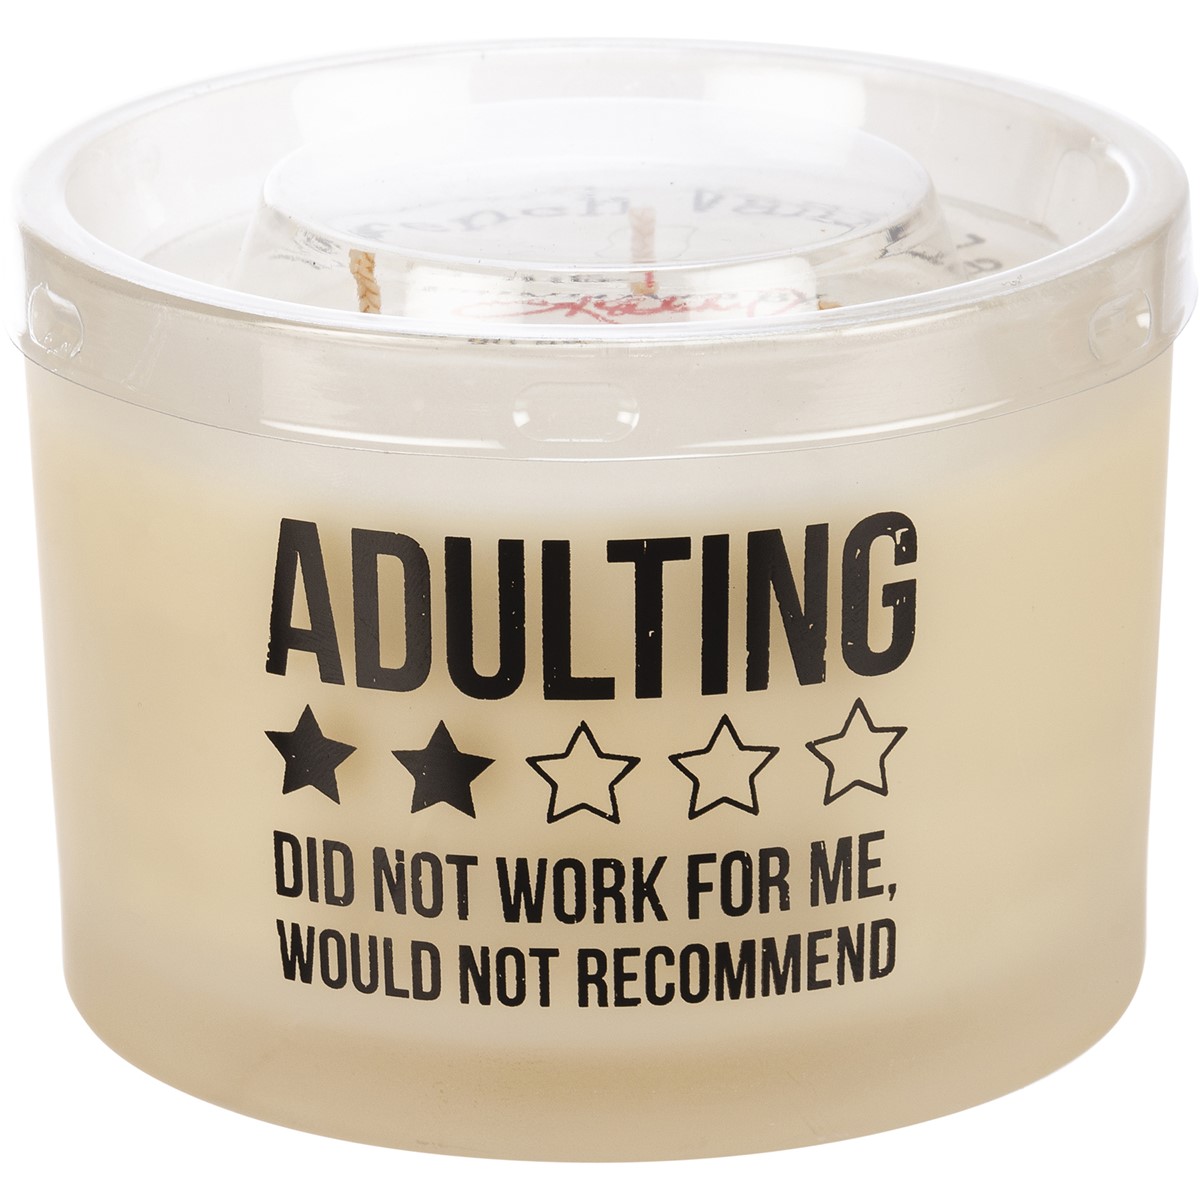 Adulting Did Not Work For Me Jar Candle - Soy Wax, Glass, Cotton